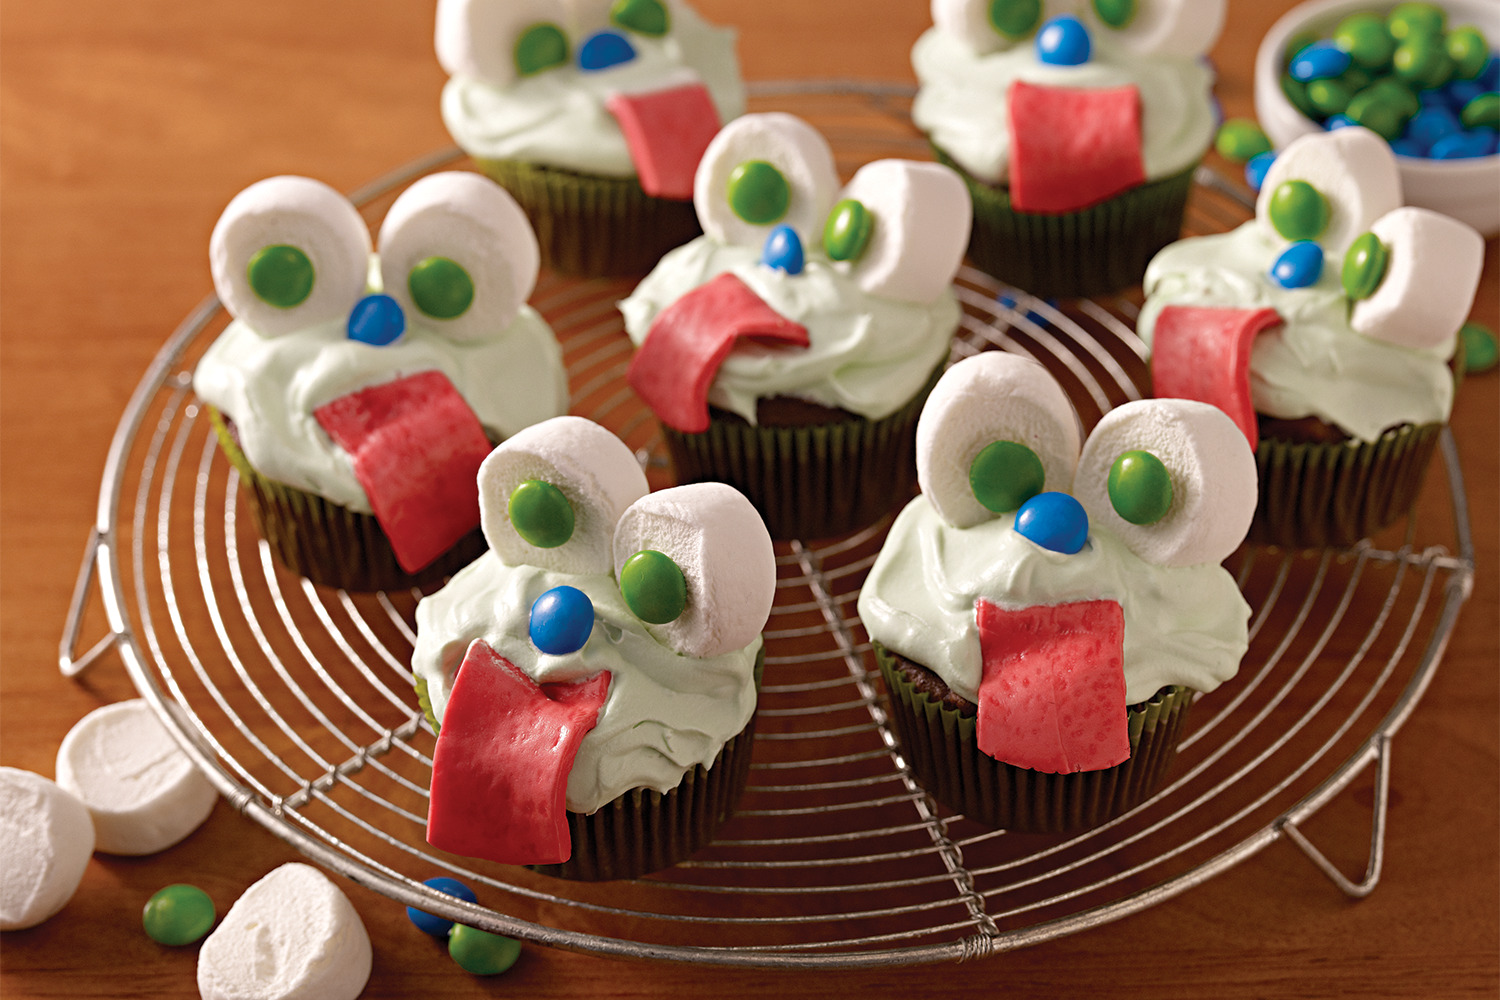 'Slime-Filled' Monster Cupcakes